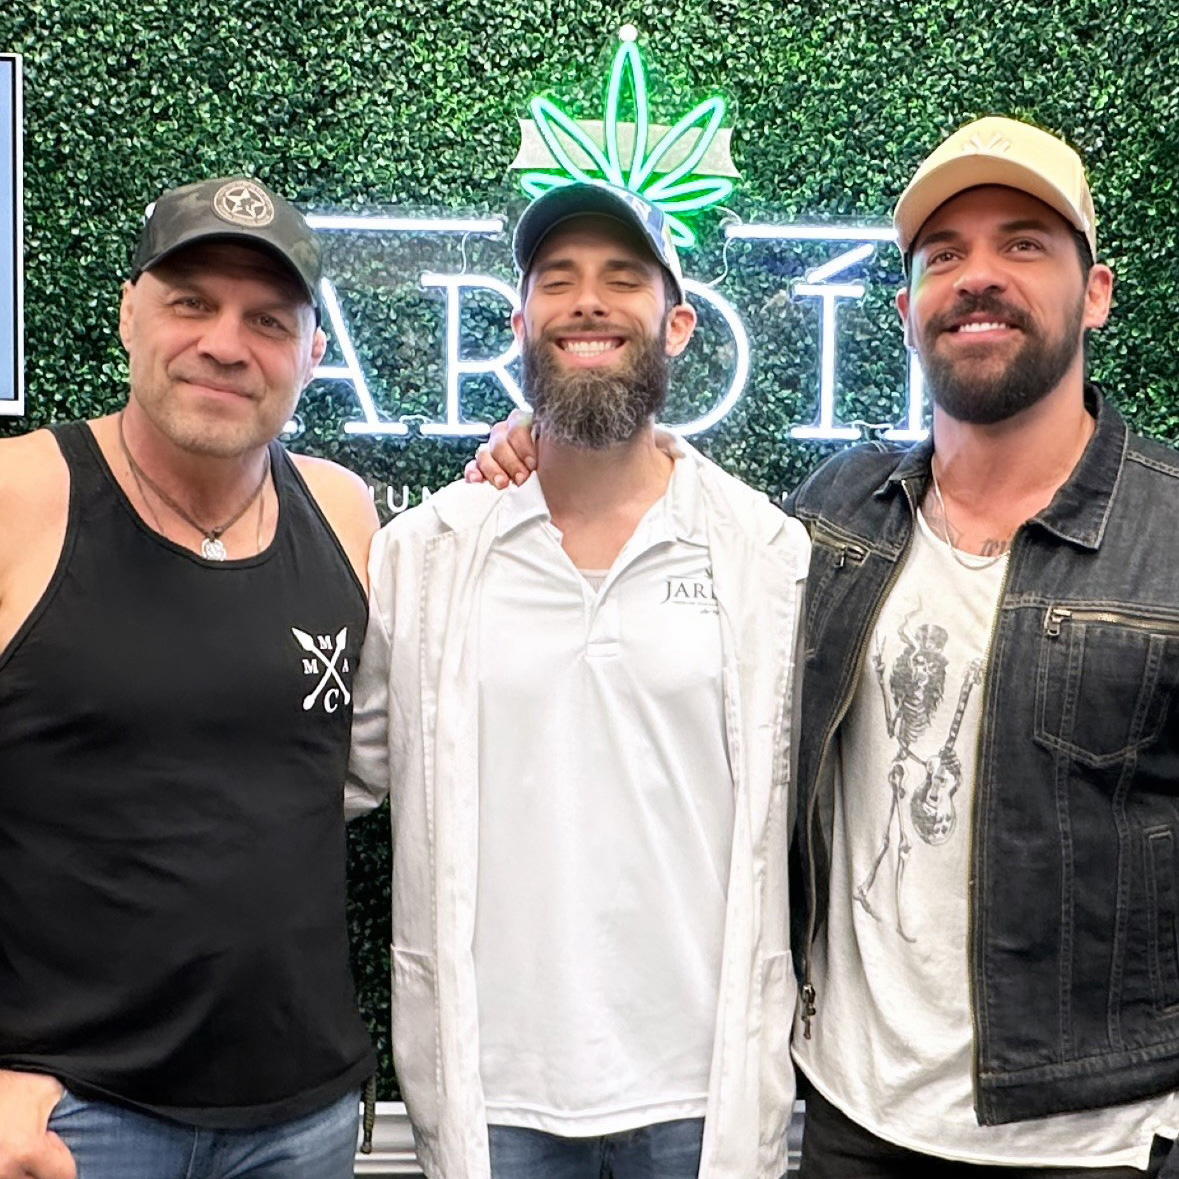 📷 Big shoutout to our amazing sponsors @weedmaps and @Jardin_LasVegas ! 📷 We couldn't be more grateful for their generous support of this year's Ride for Our Troops event. Your commitment to honoring our combat & injured veterans is truly inspiring. #Veterans @Randy_Couture